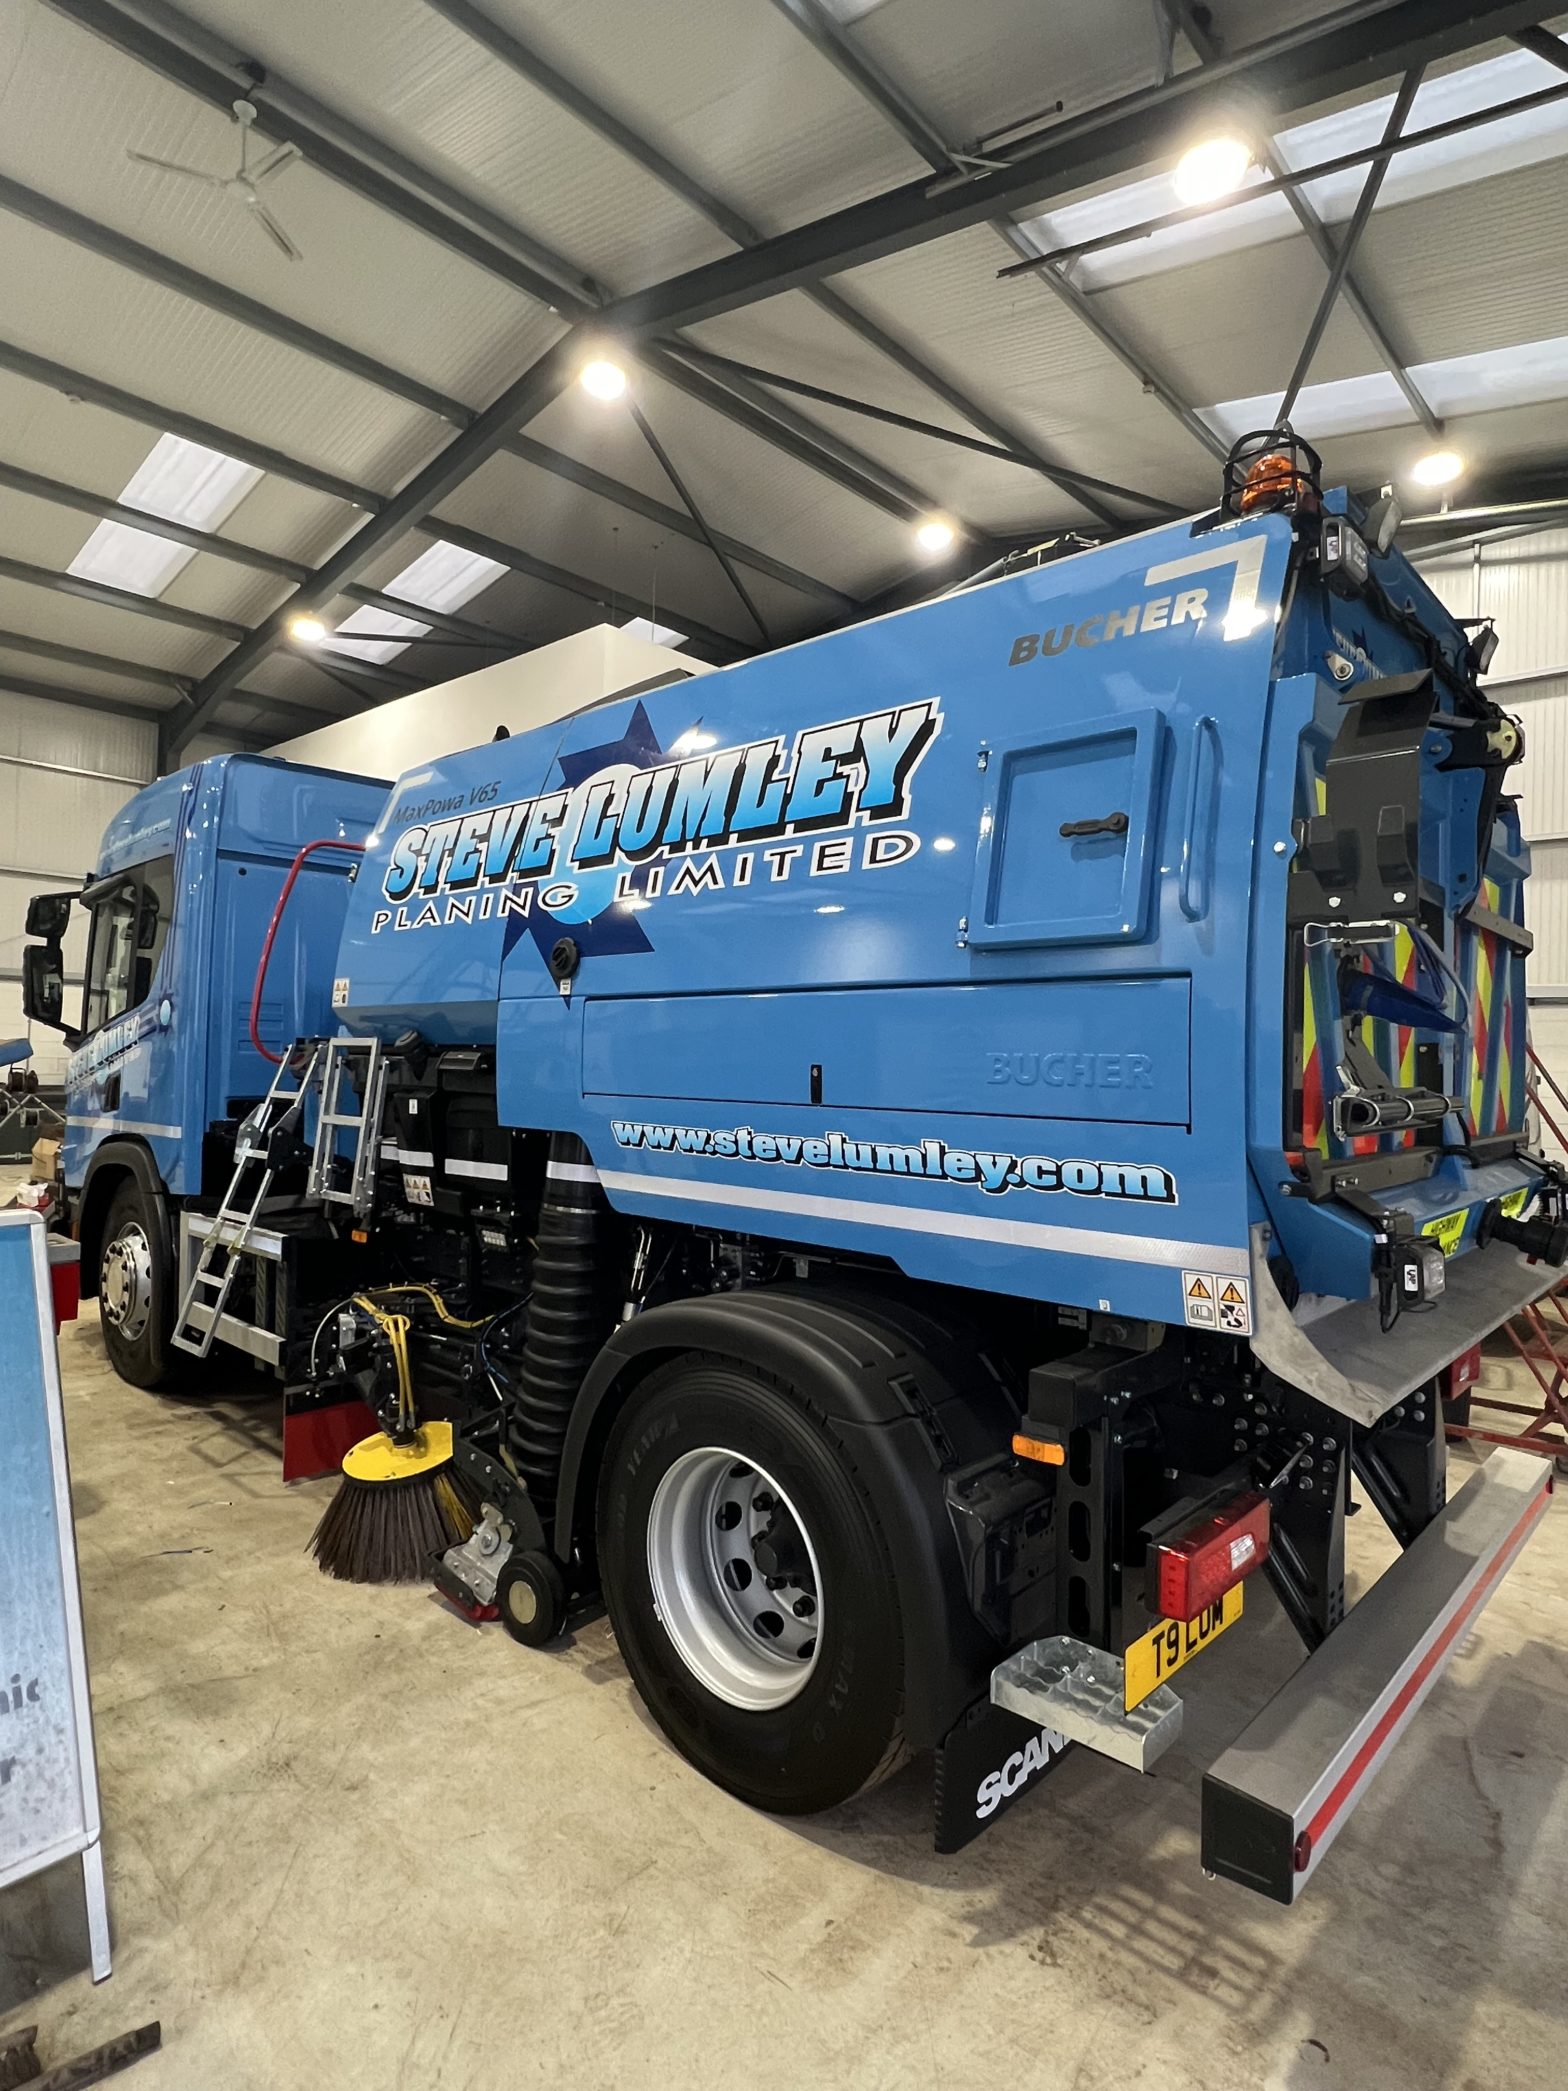 A NEW Sweeper Joins The Lumley Fleet